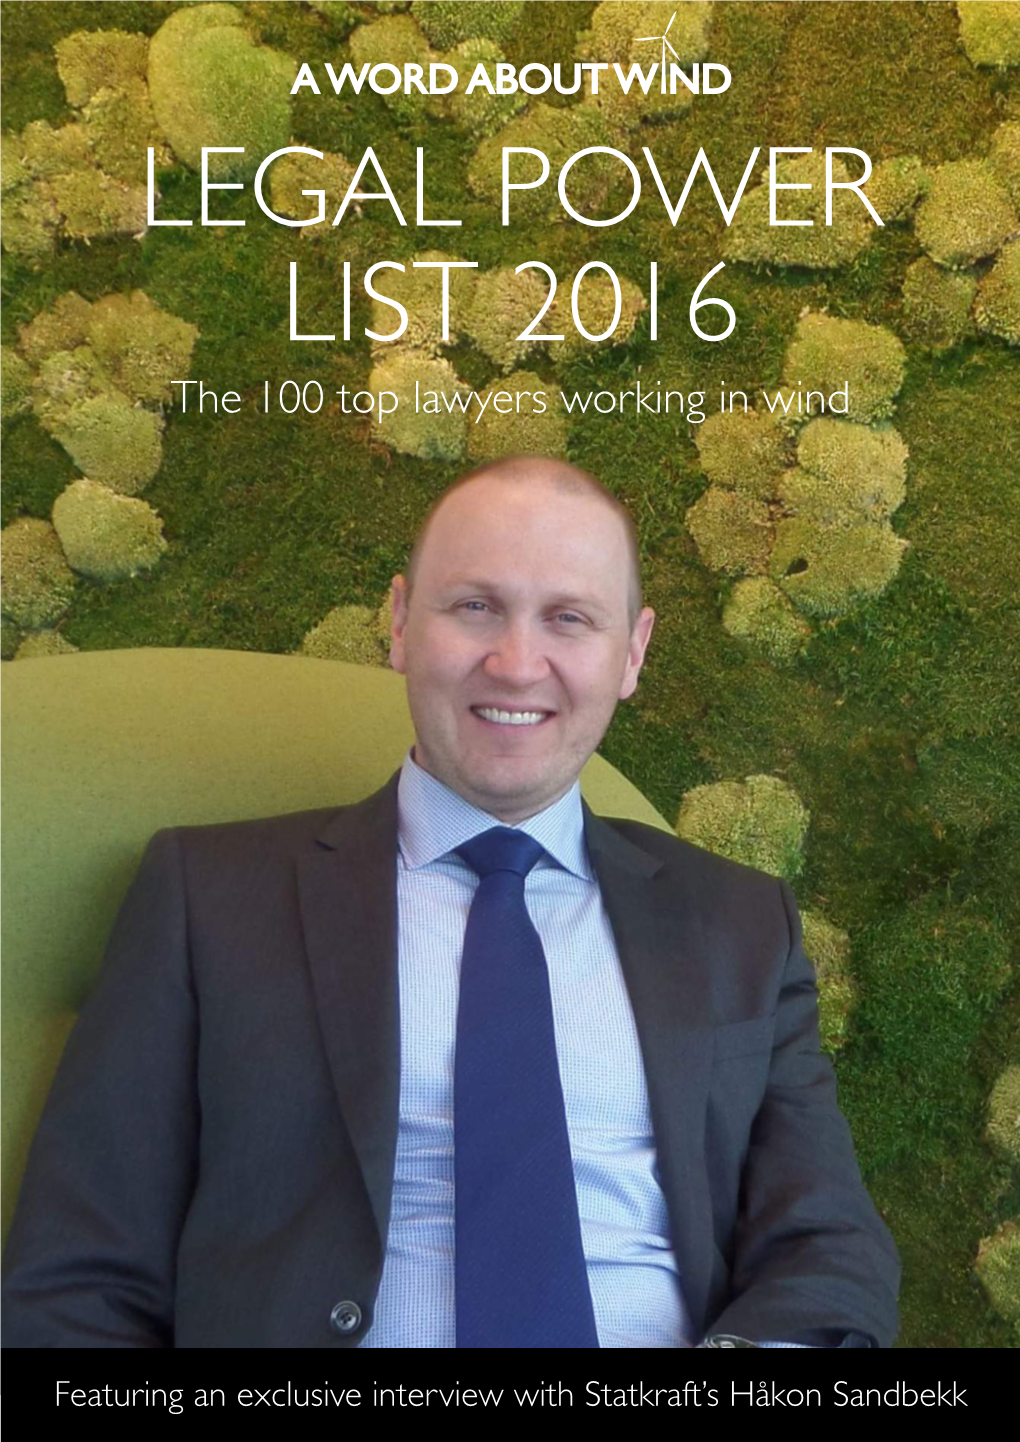 LEGAL POWER LIST 2016 the 100 Top Lawyers Working in Wind